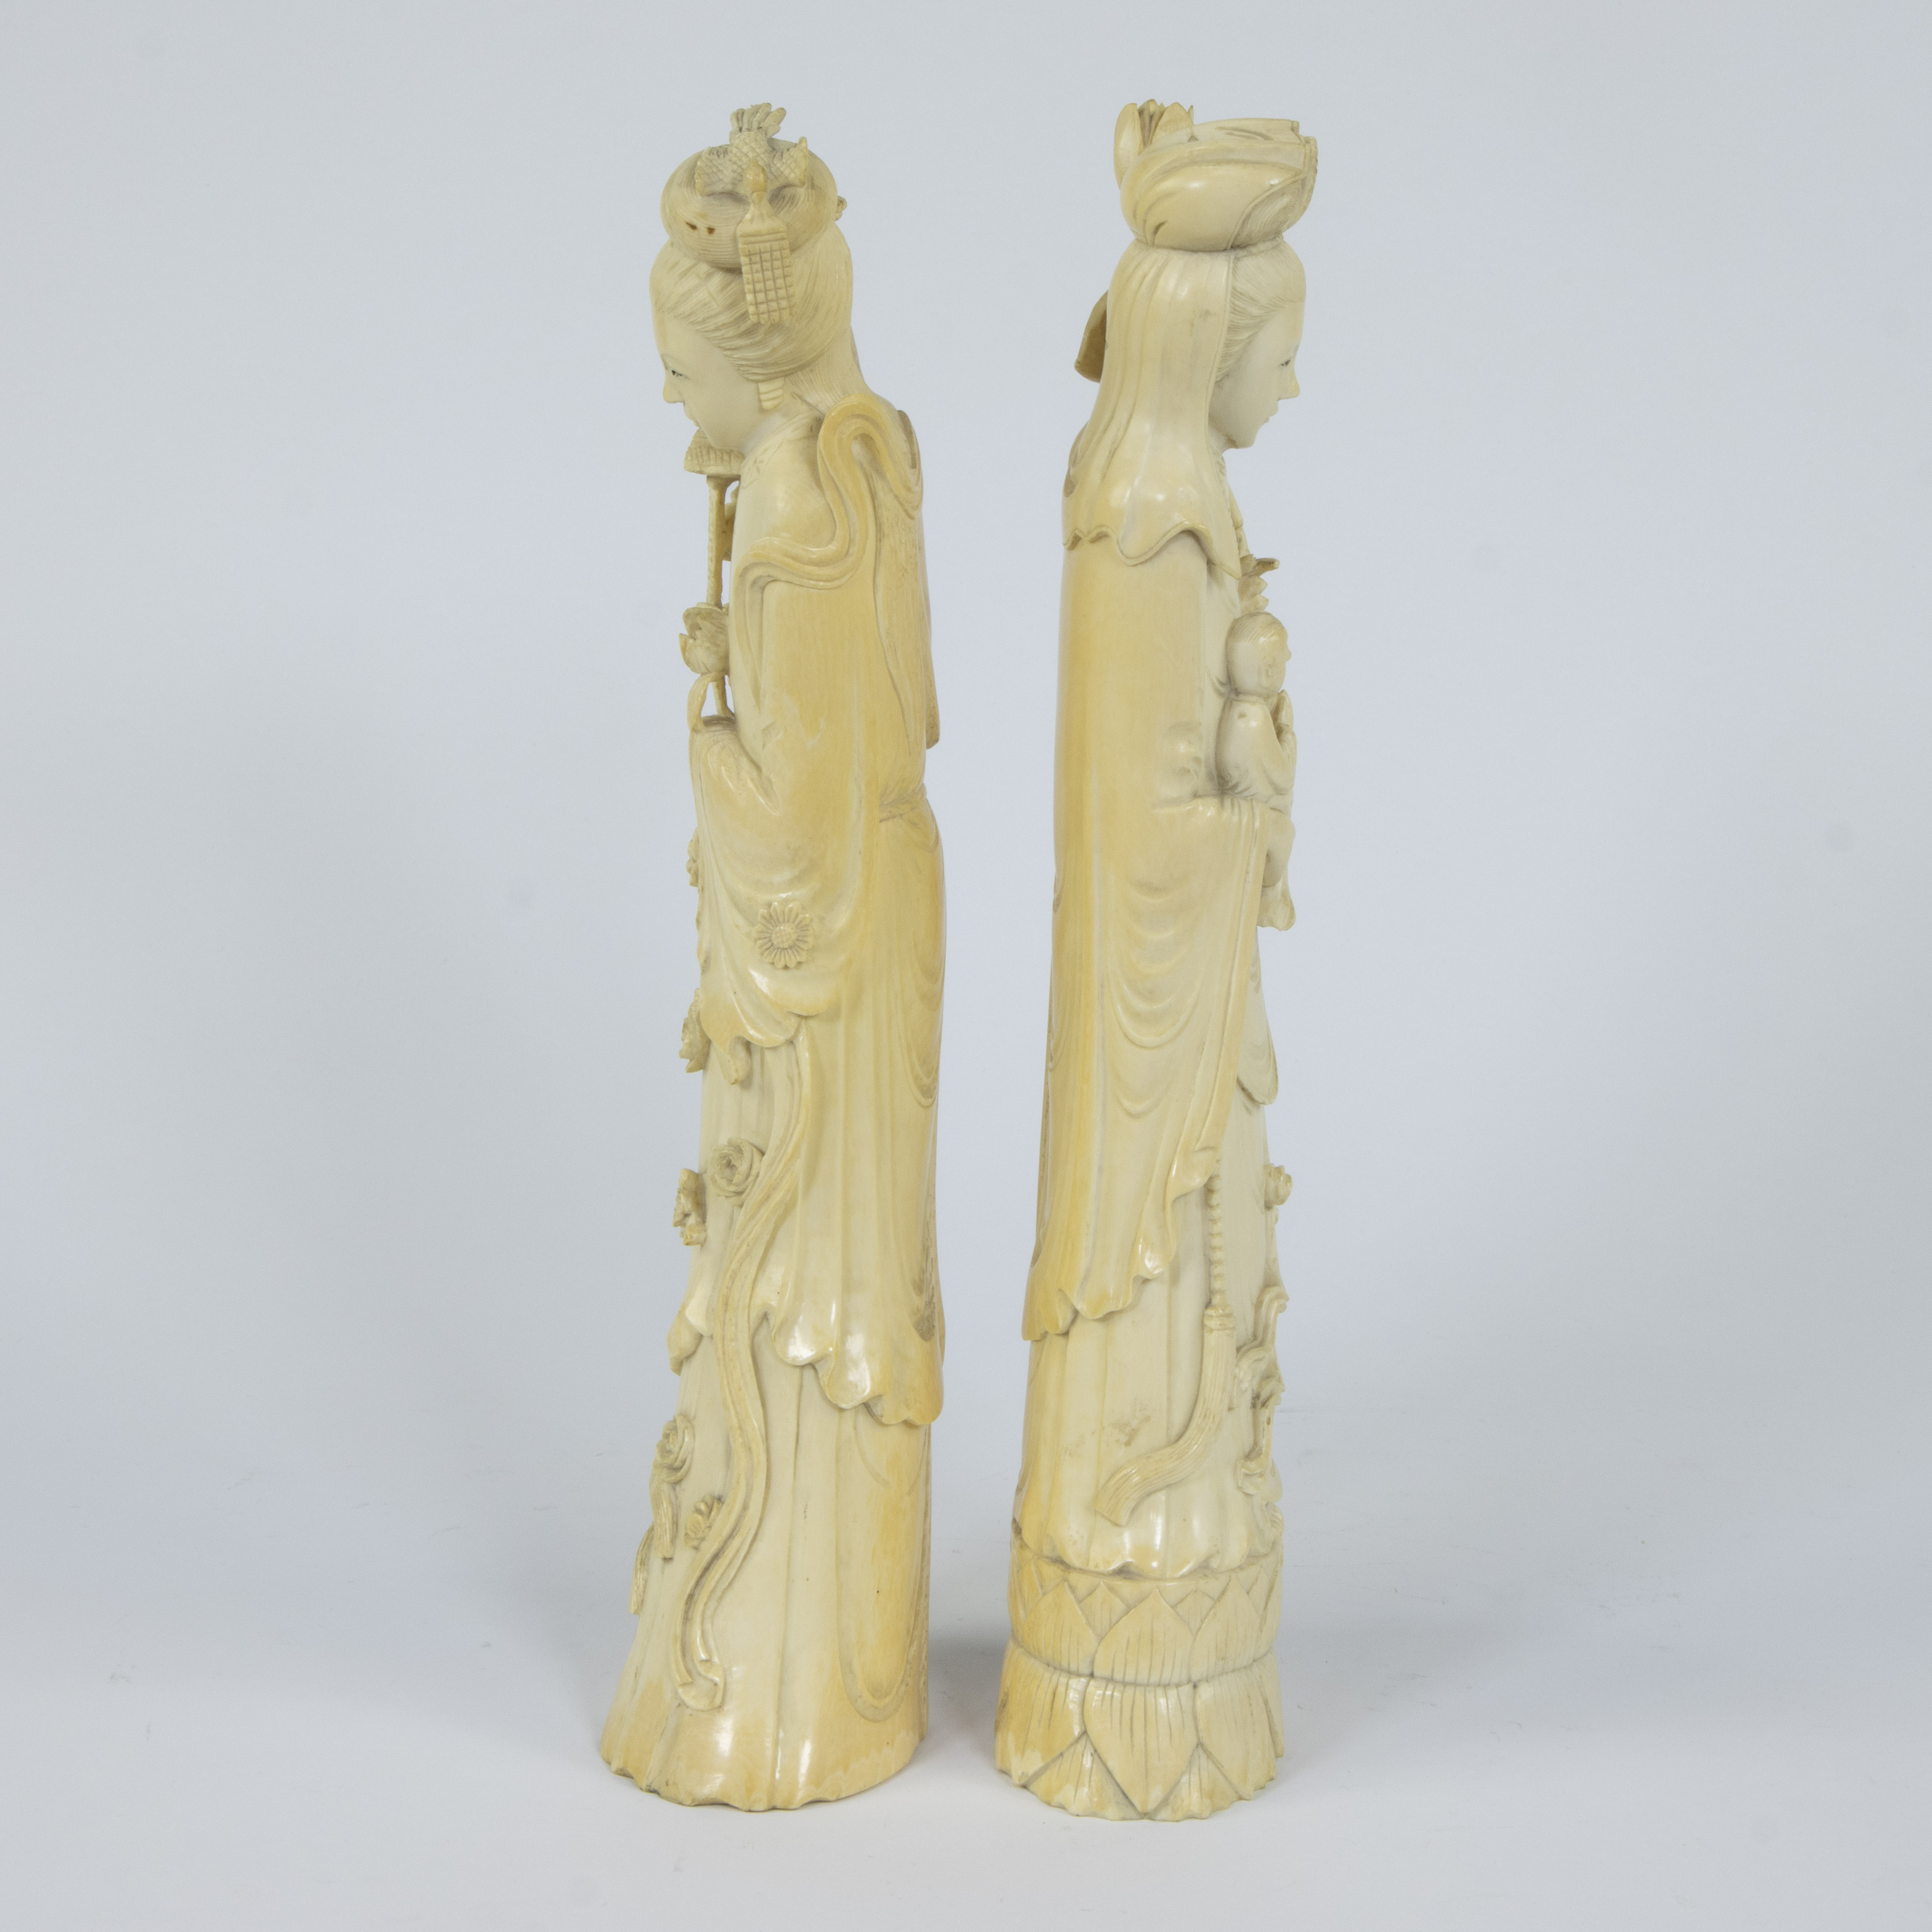 A pair of Japanese ivory sculptures depicting two female goddesses with long robes in a graceful bow - Image 4 of 5